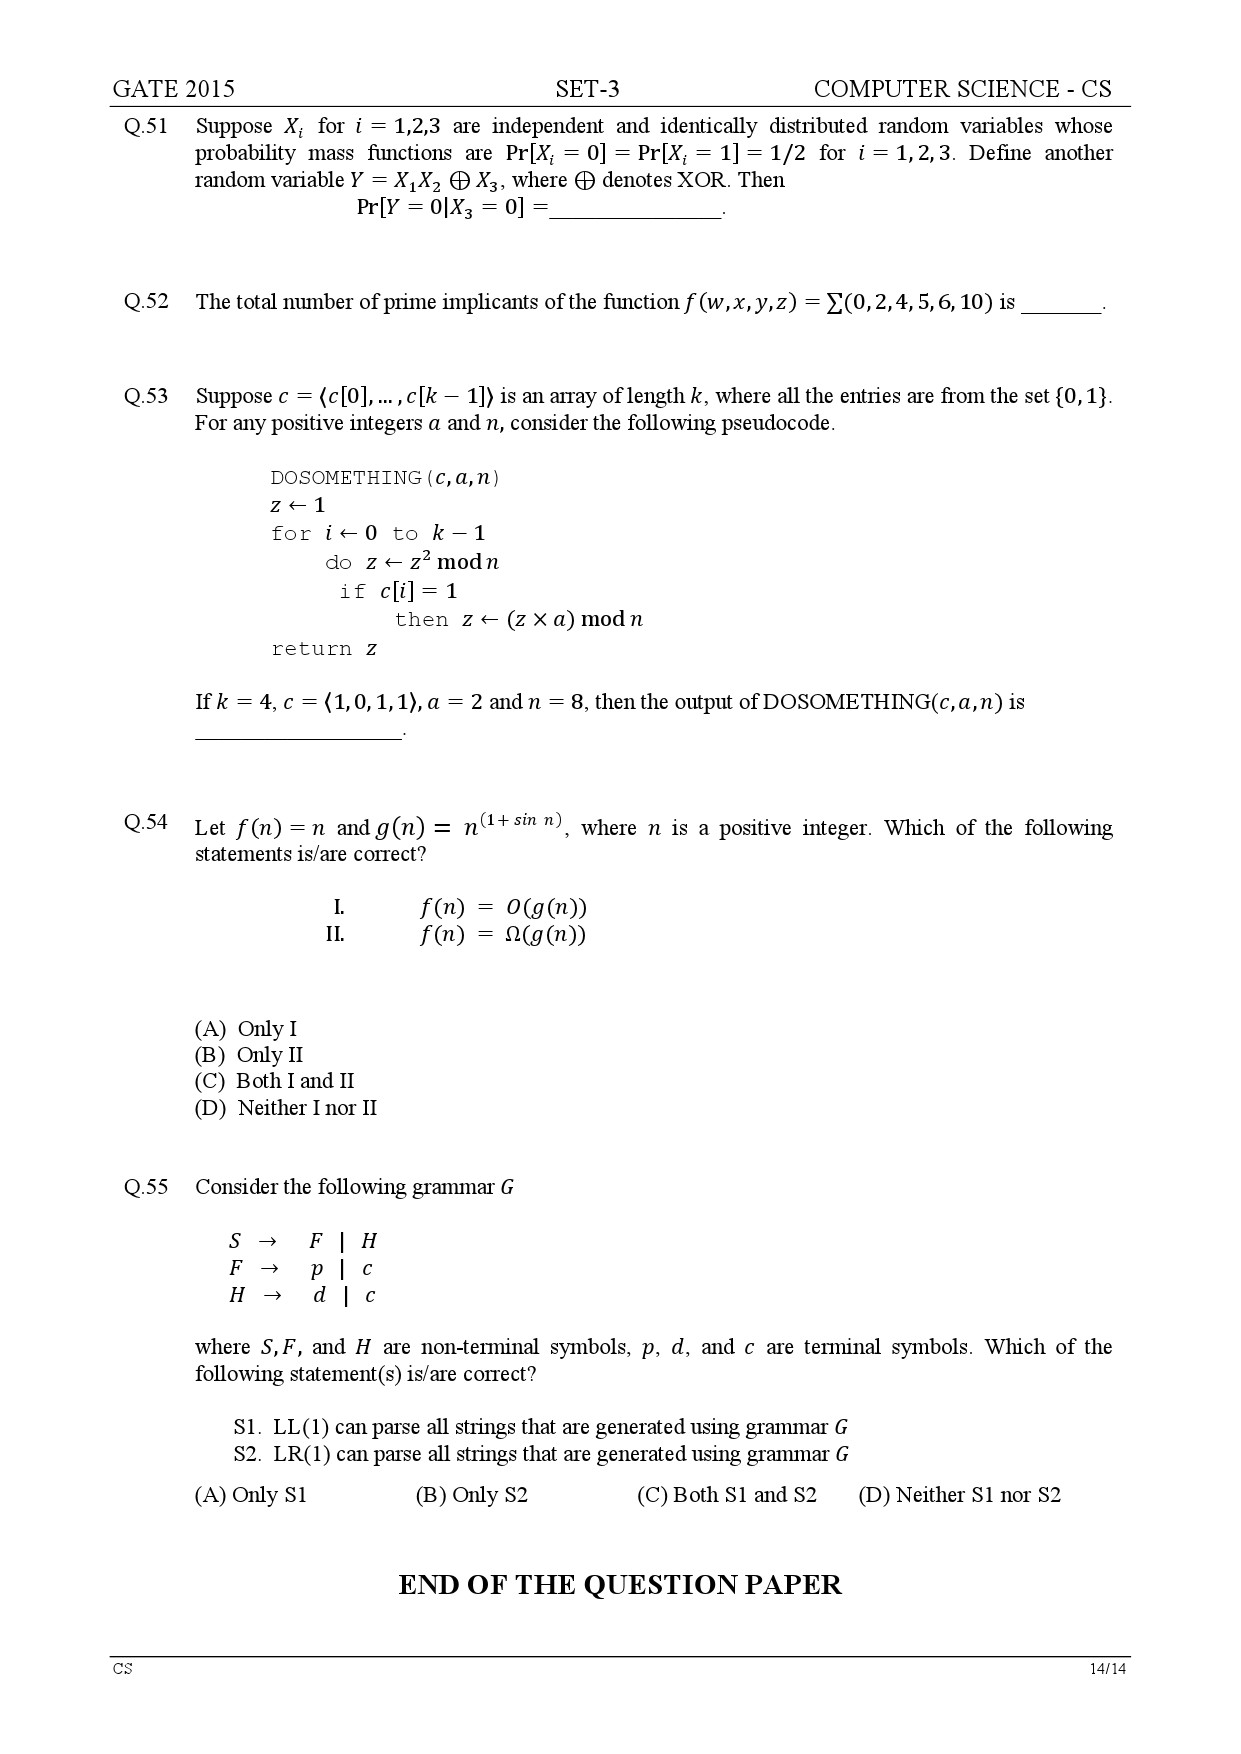 GATE Exam Question Paper 2015 Computer Science and Information Technology Set 3 14